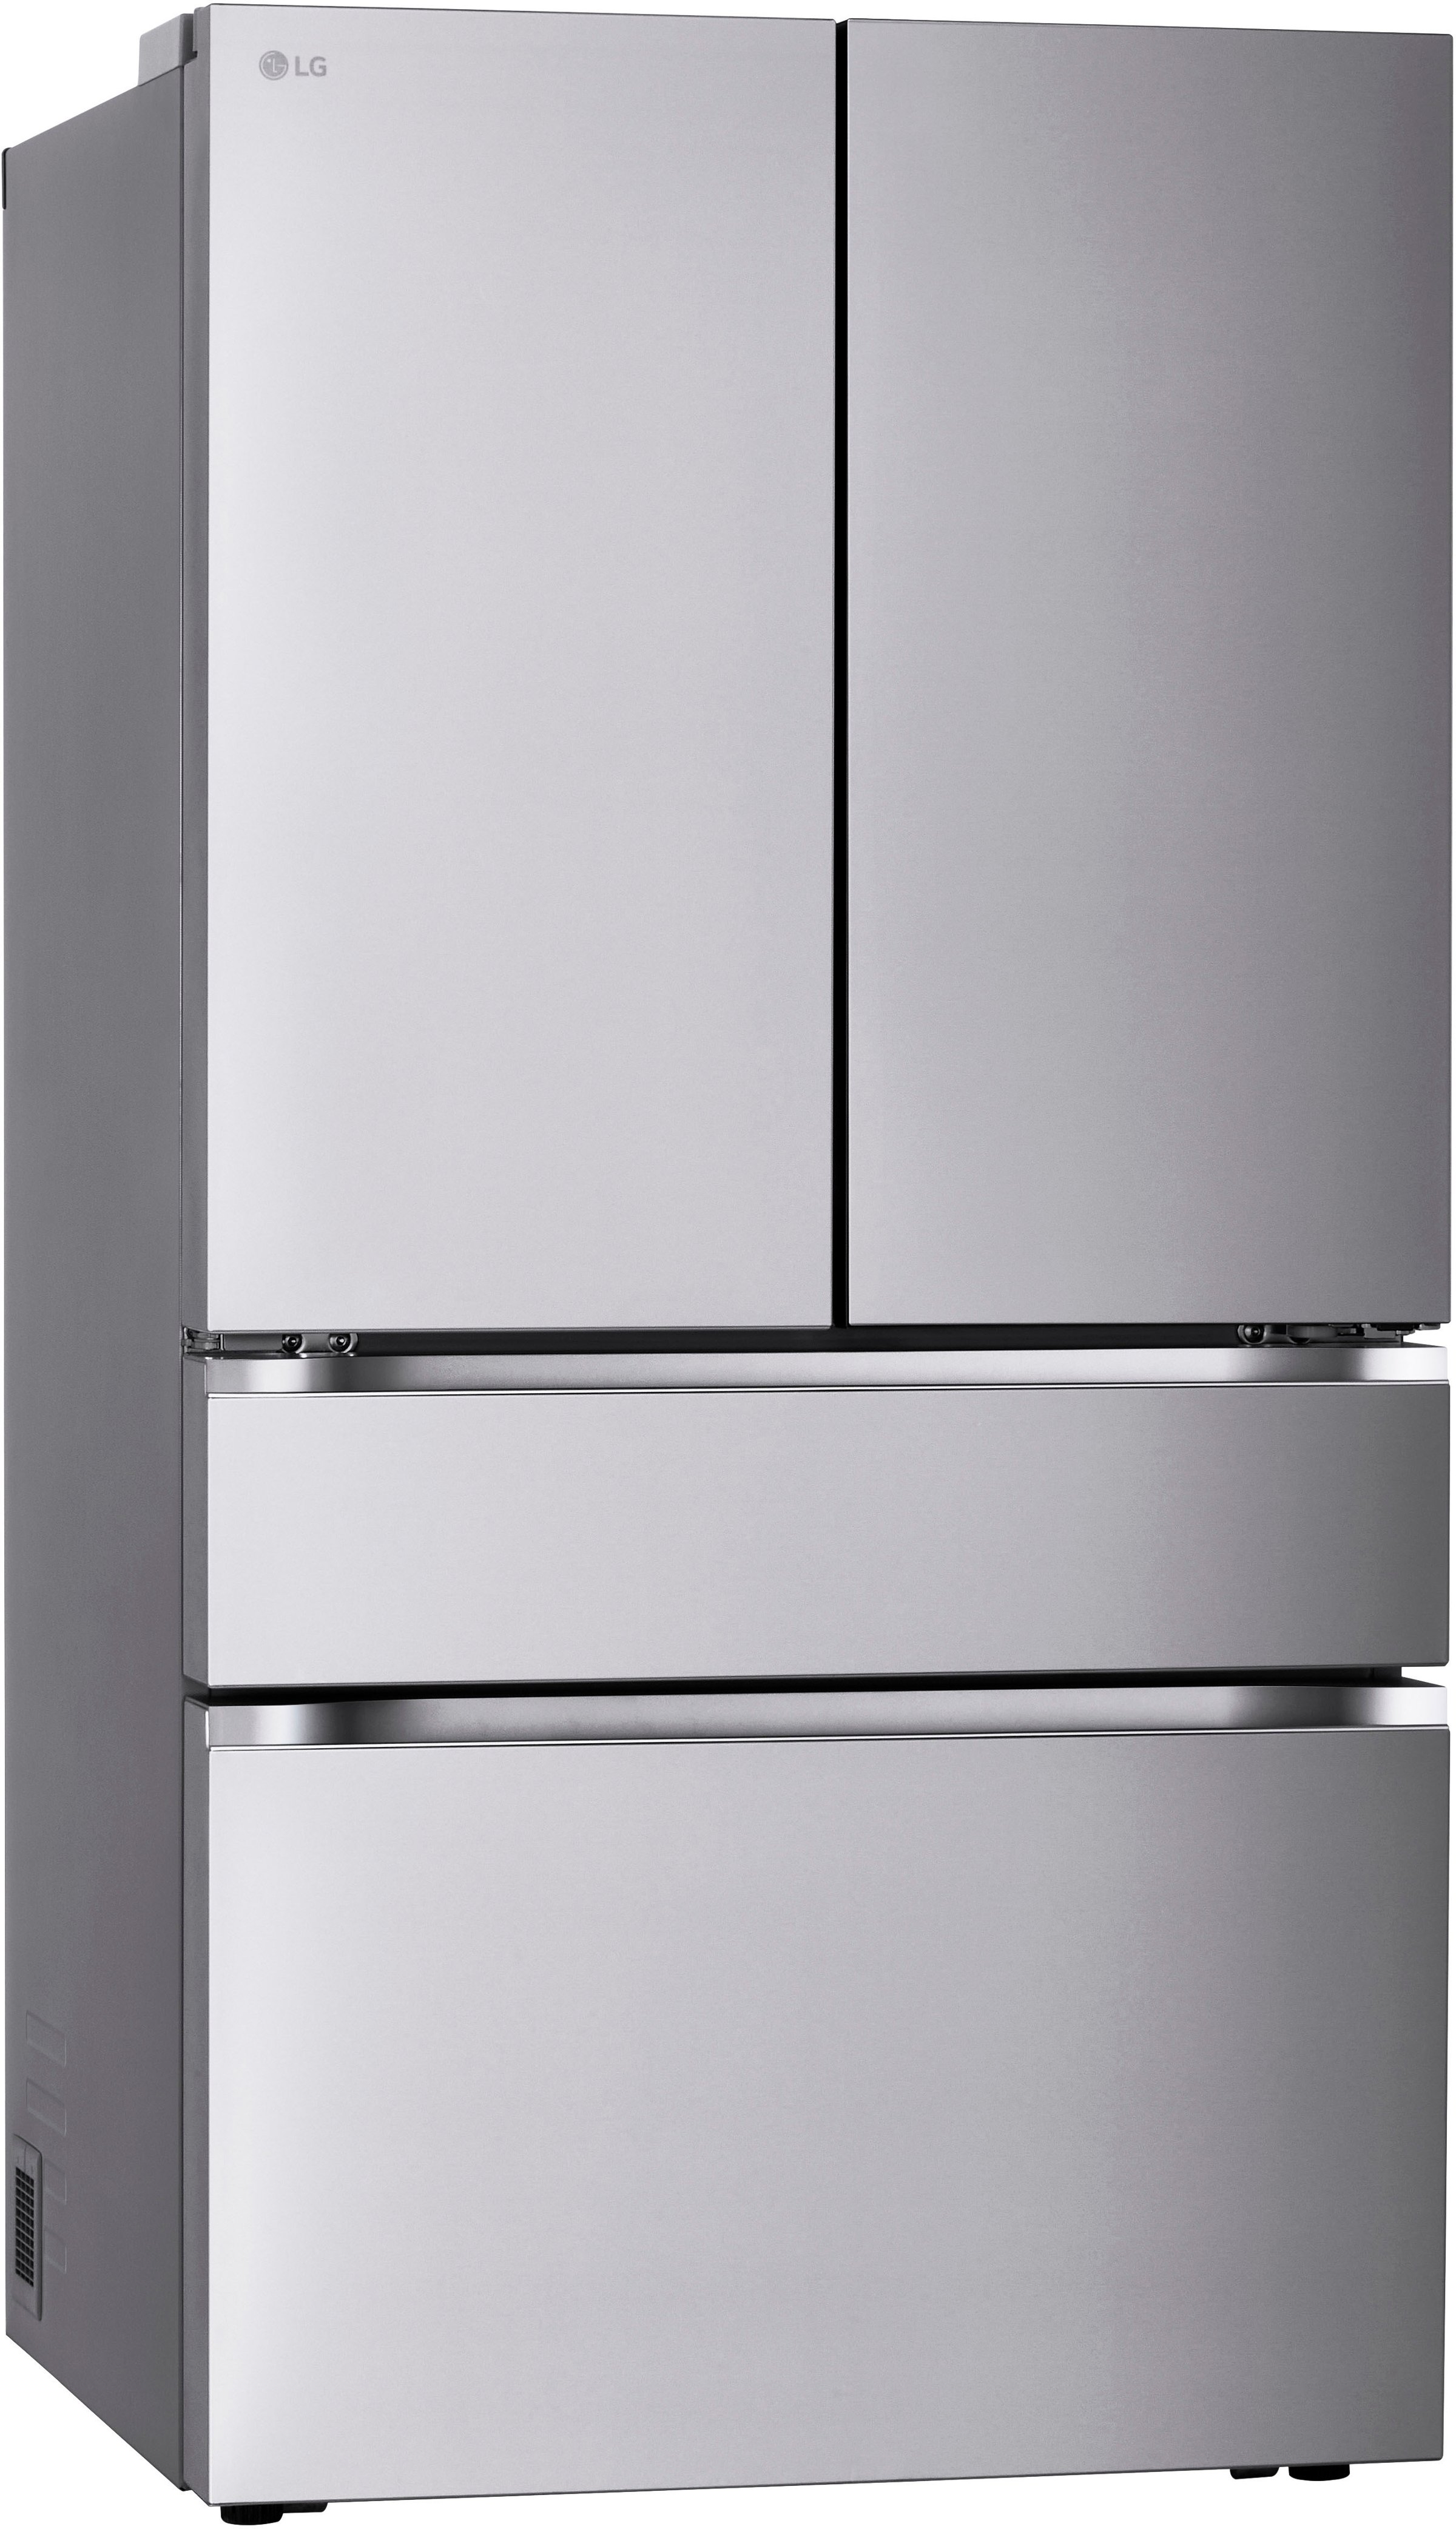 LG LFXS30786S French Door Refrigerator with Bluetooth Speaker review: For  four grand, this LG fridge jams - CNET